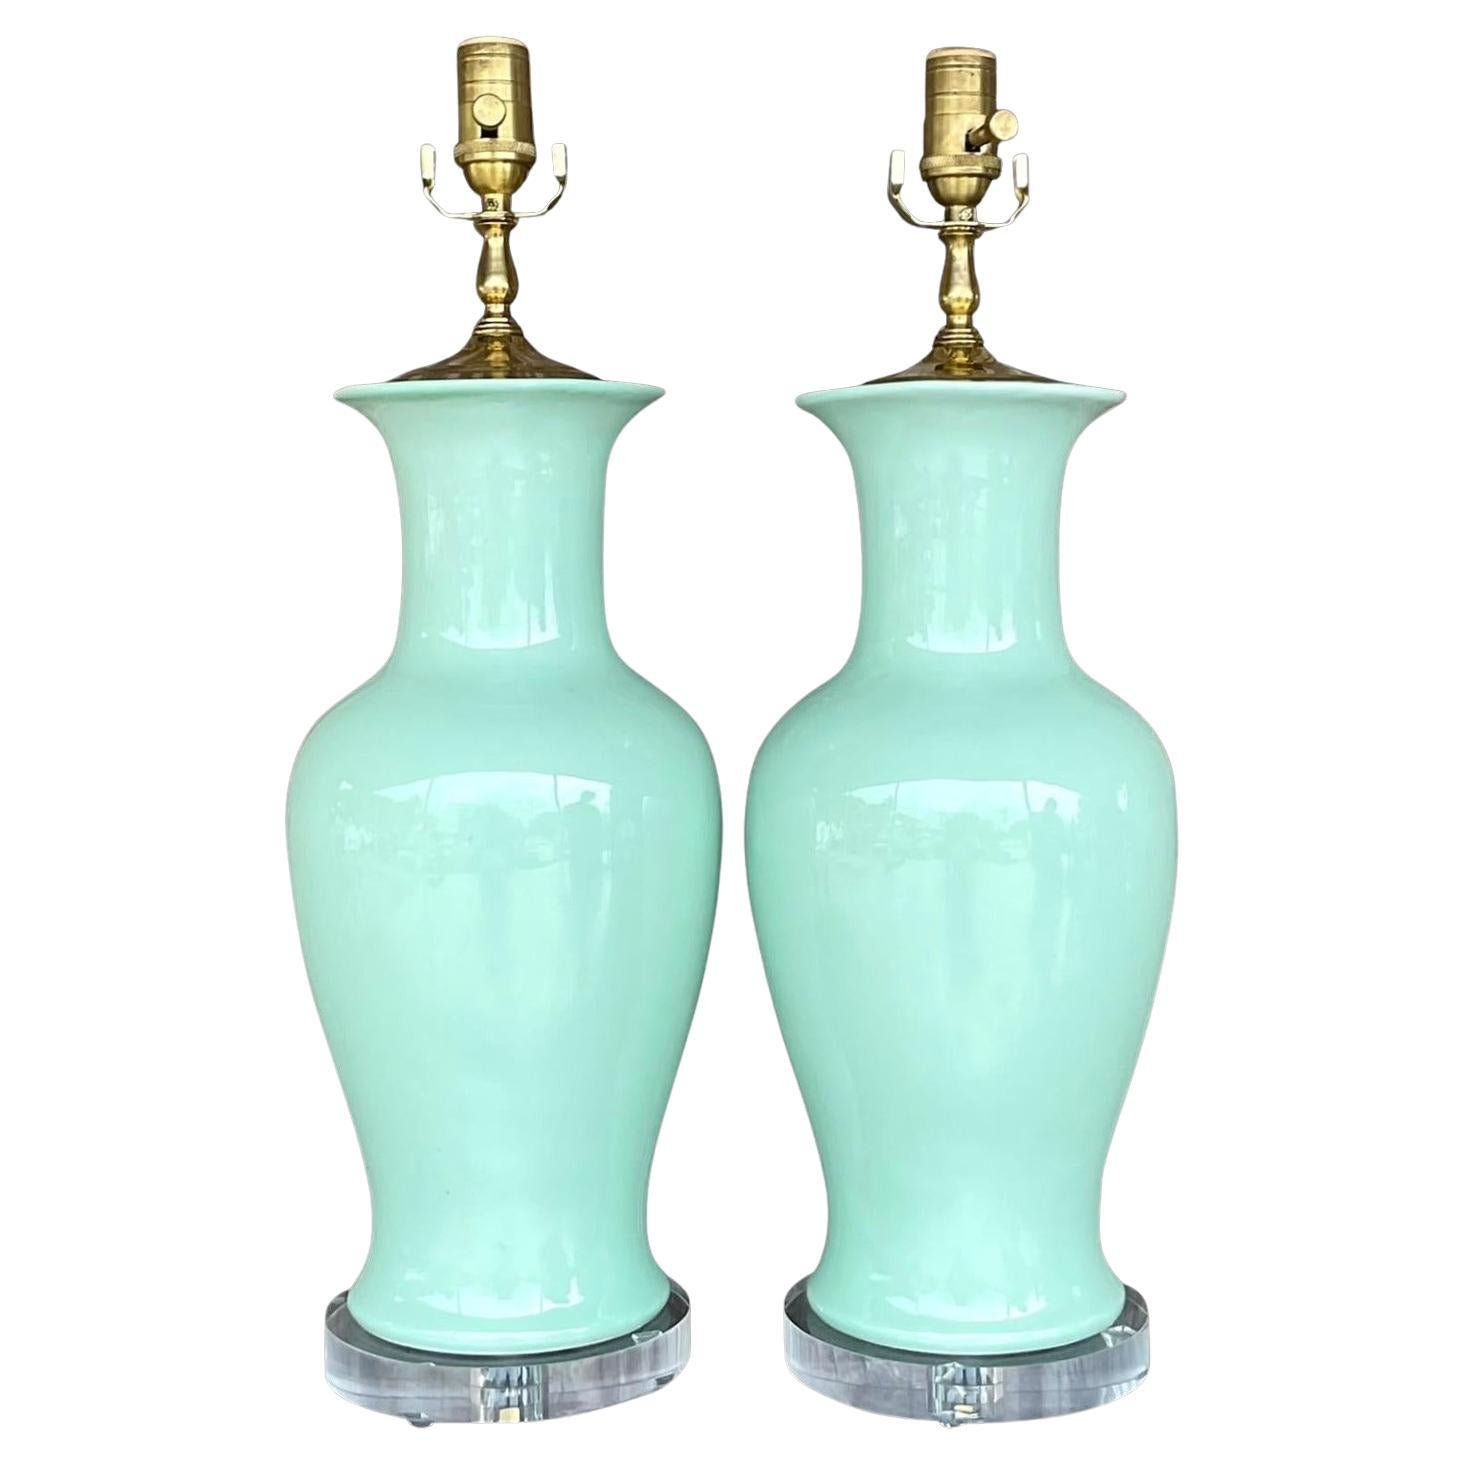 Late 20th Century Vintage Regency Glazed Ceramic Table Lamps - a Pair For Sale